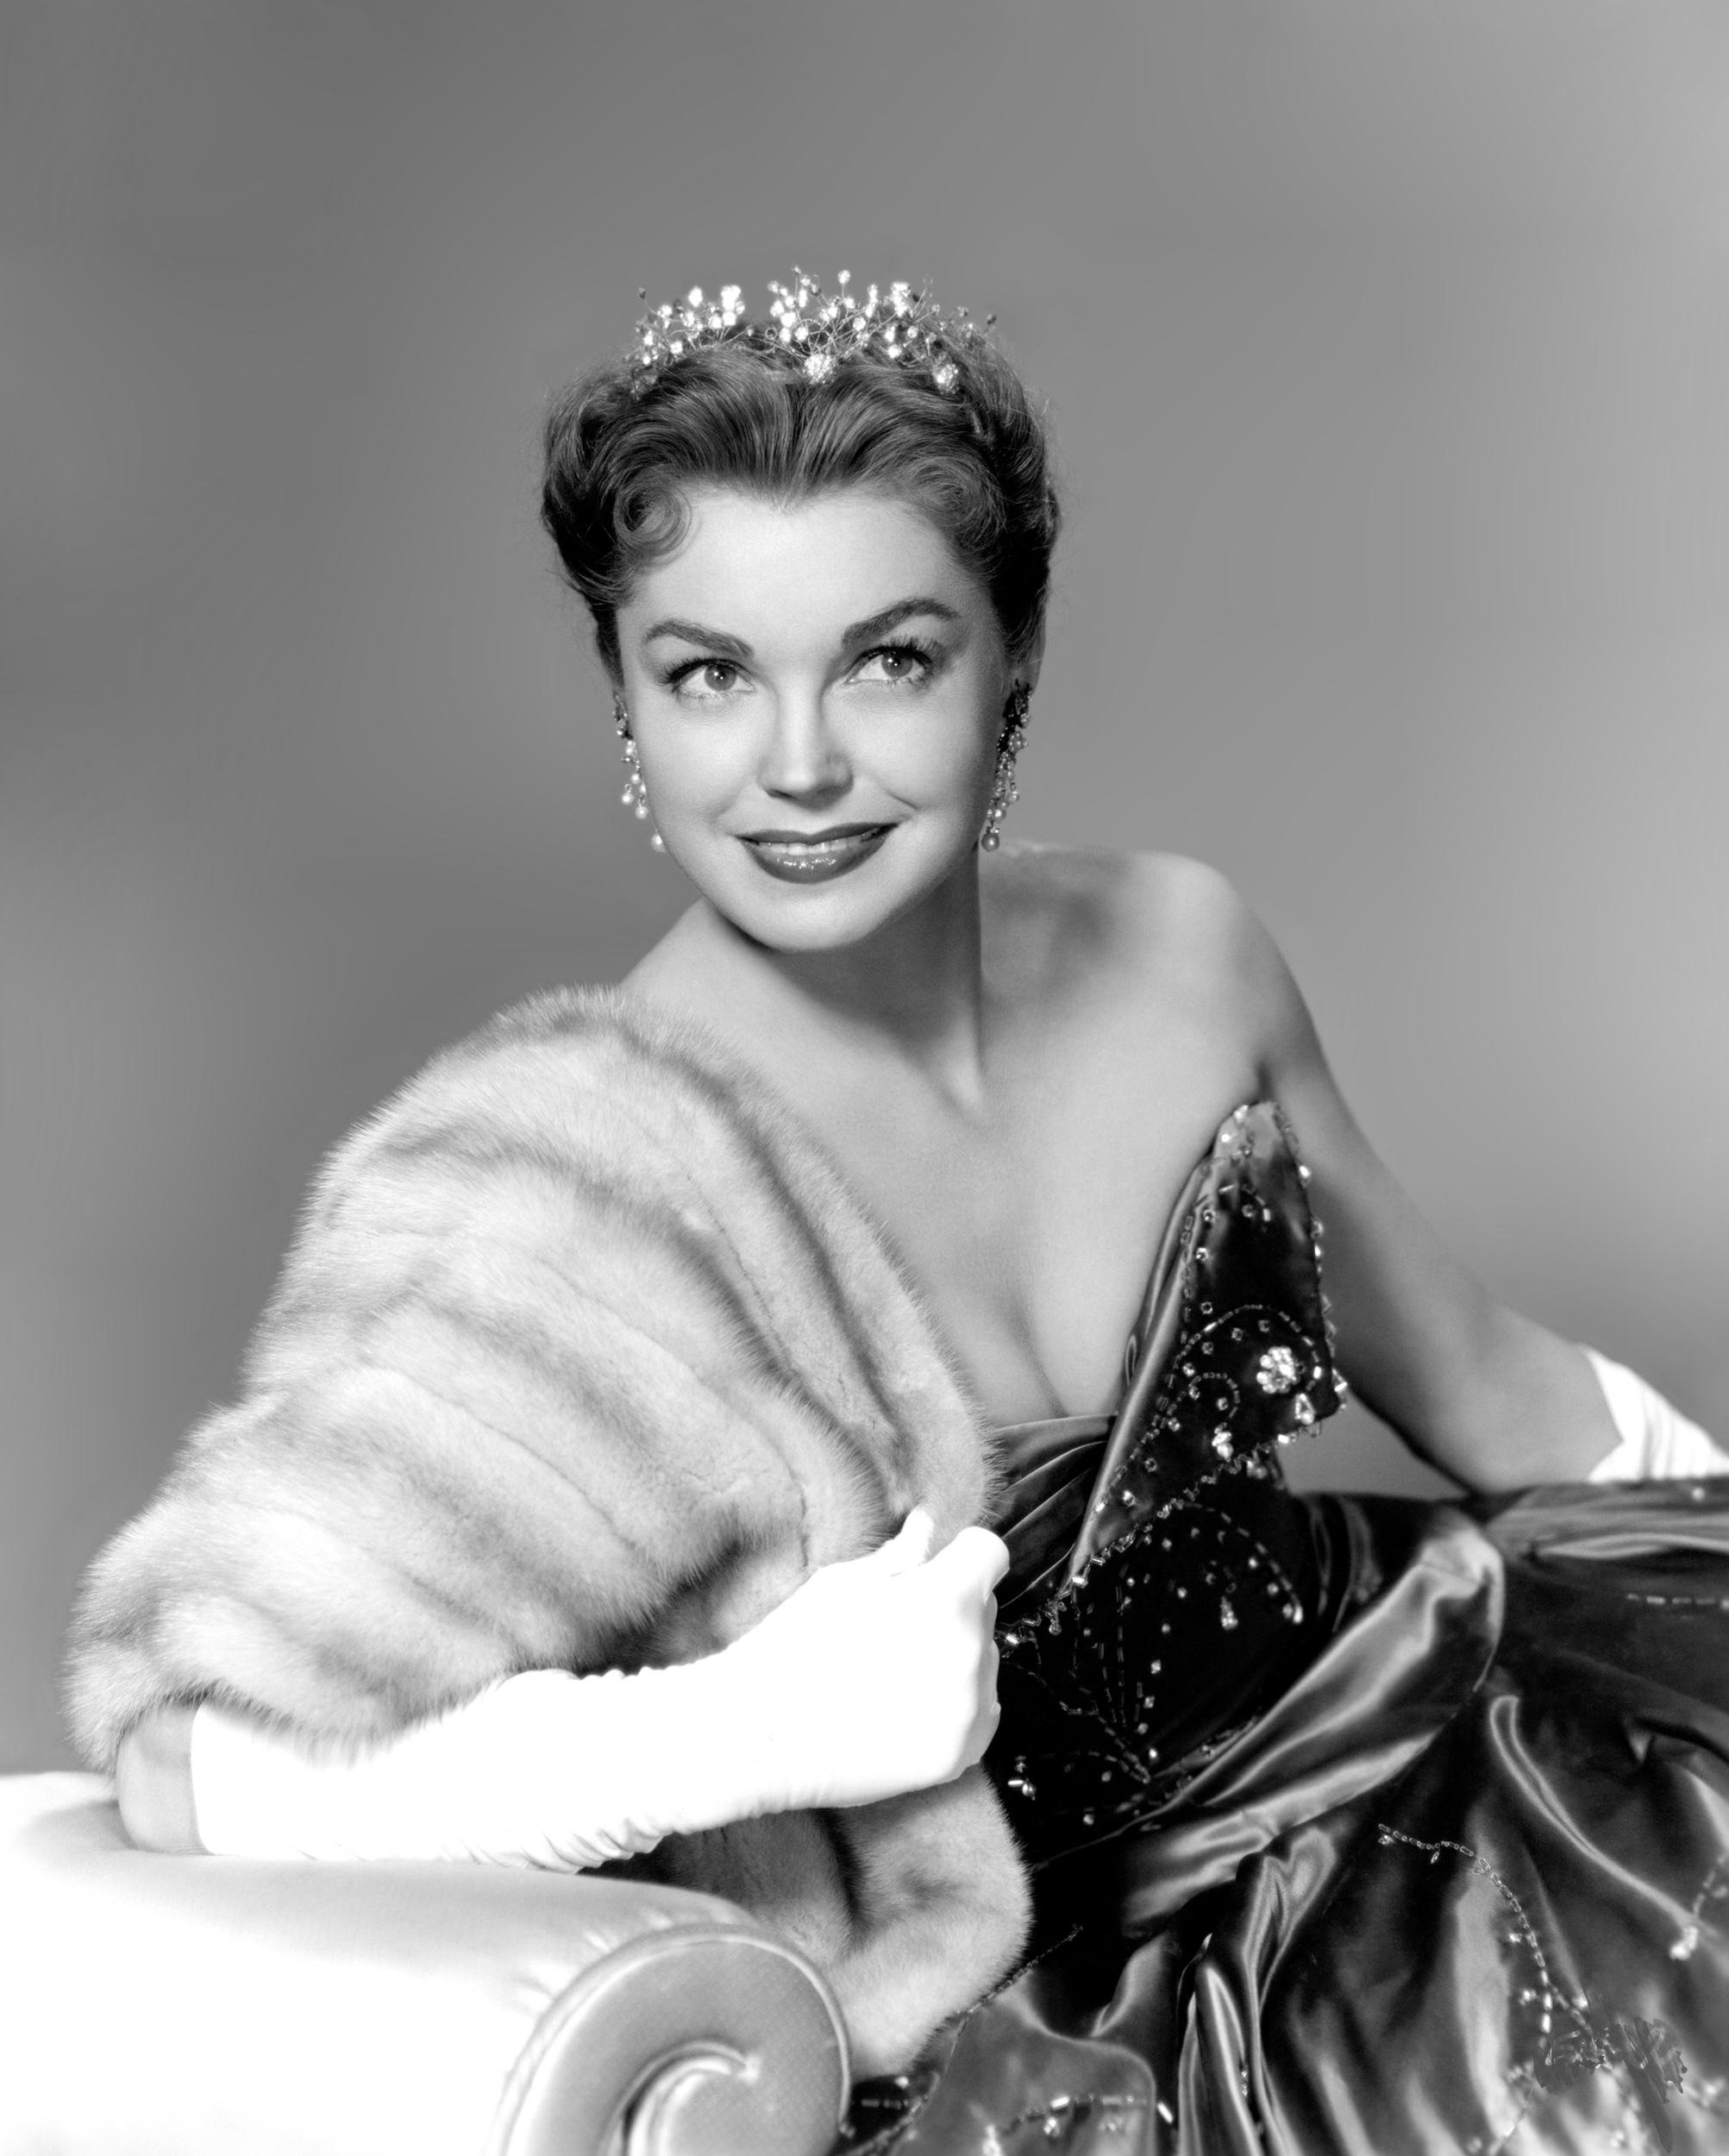 R.I.P. : Swimmer turned movie star, Esther Williams, dead at 91 Annex%20-%20Williams,%20Esther_06